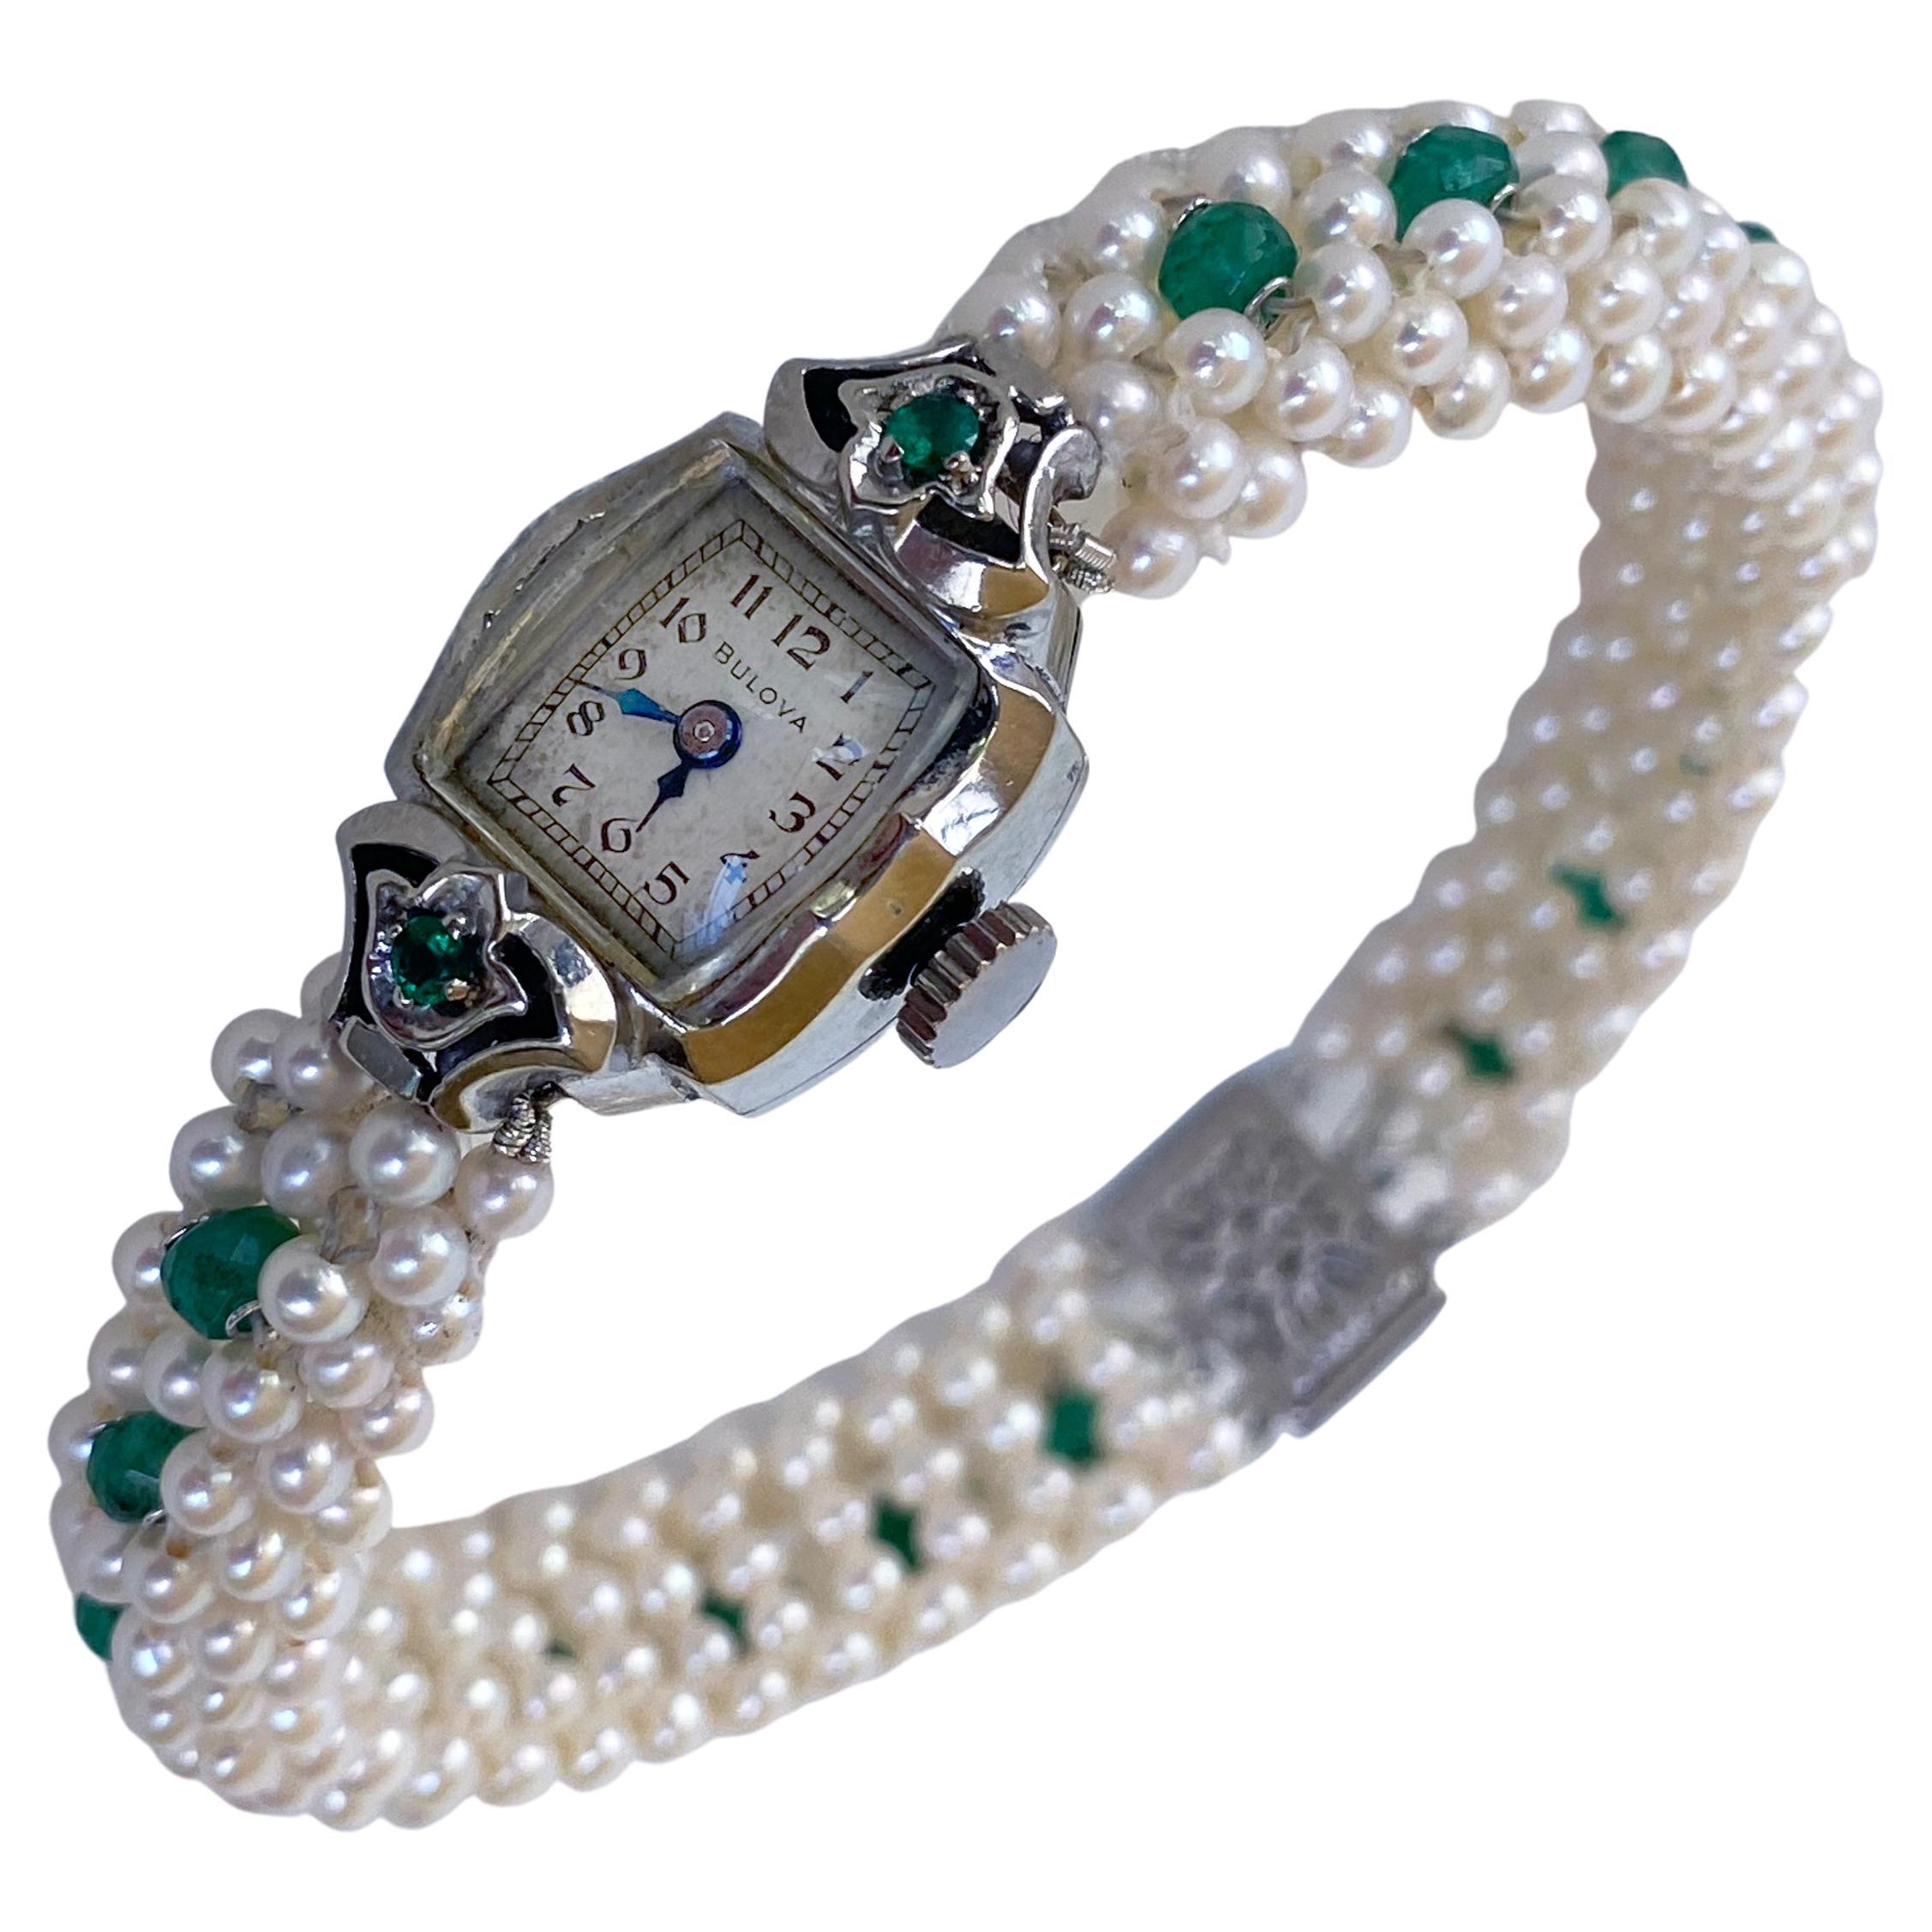 Marina J. Emerald Encrusted Vintage Watch with Pearls and 14k White Gold